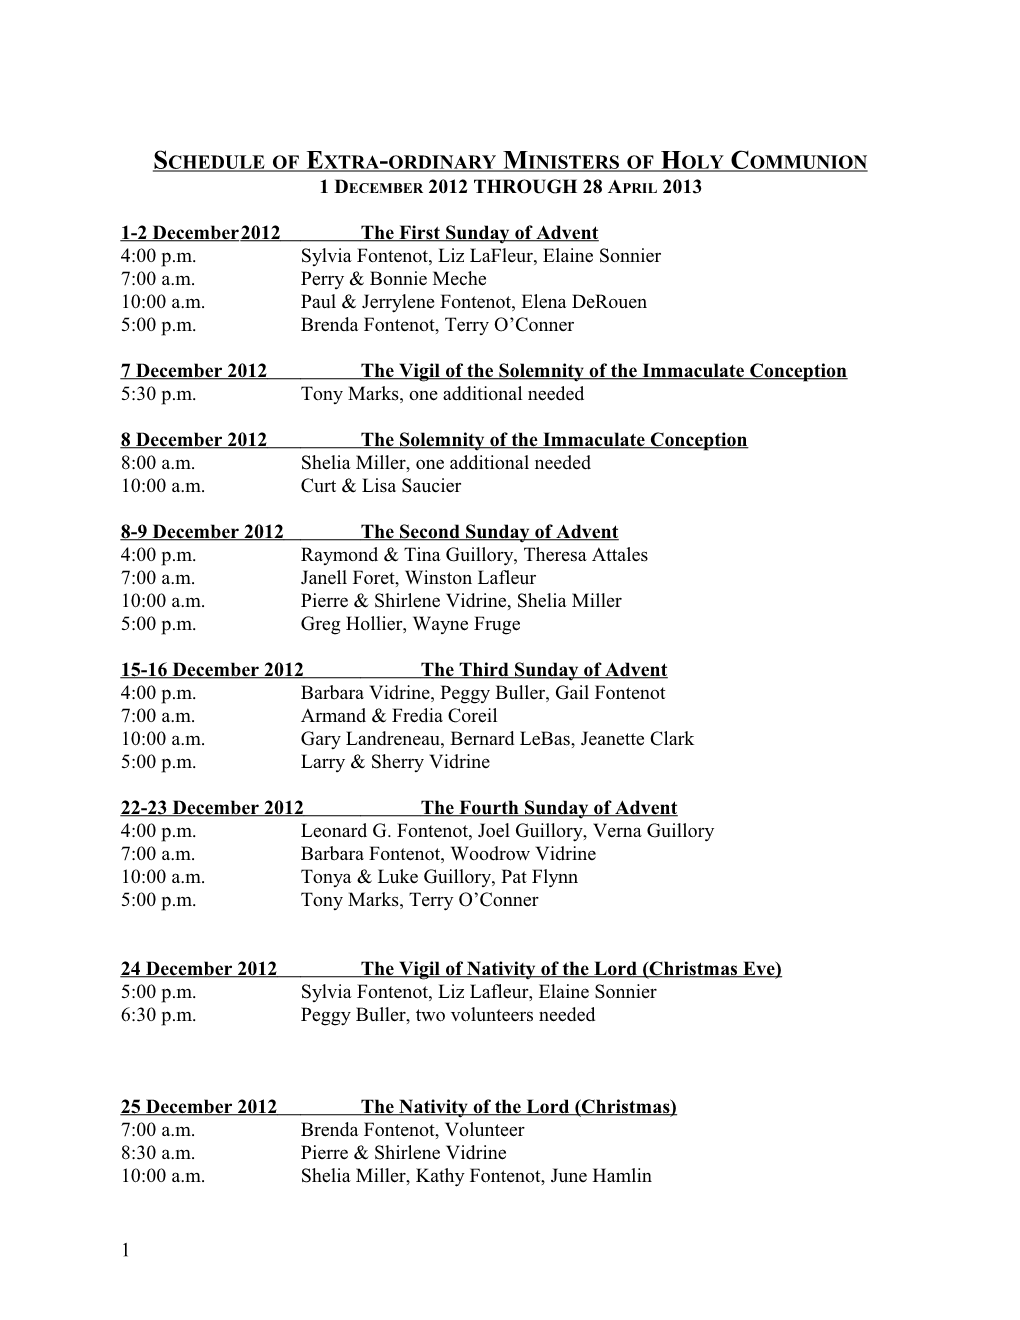 Schedule of Extra-Ordinary Ministers of Holy Communion